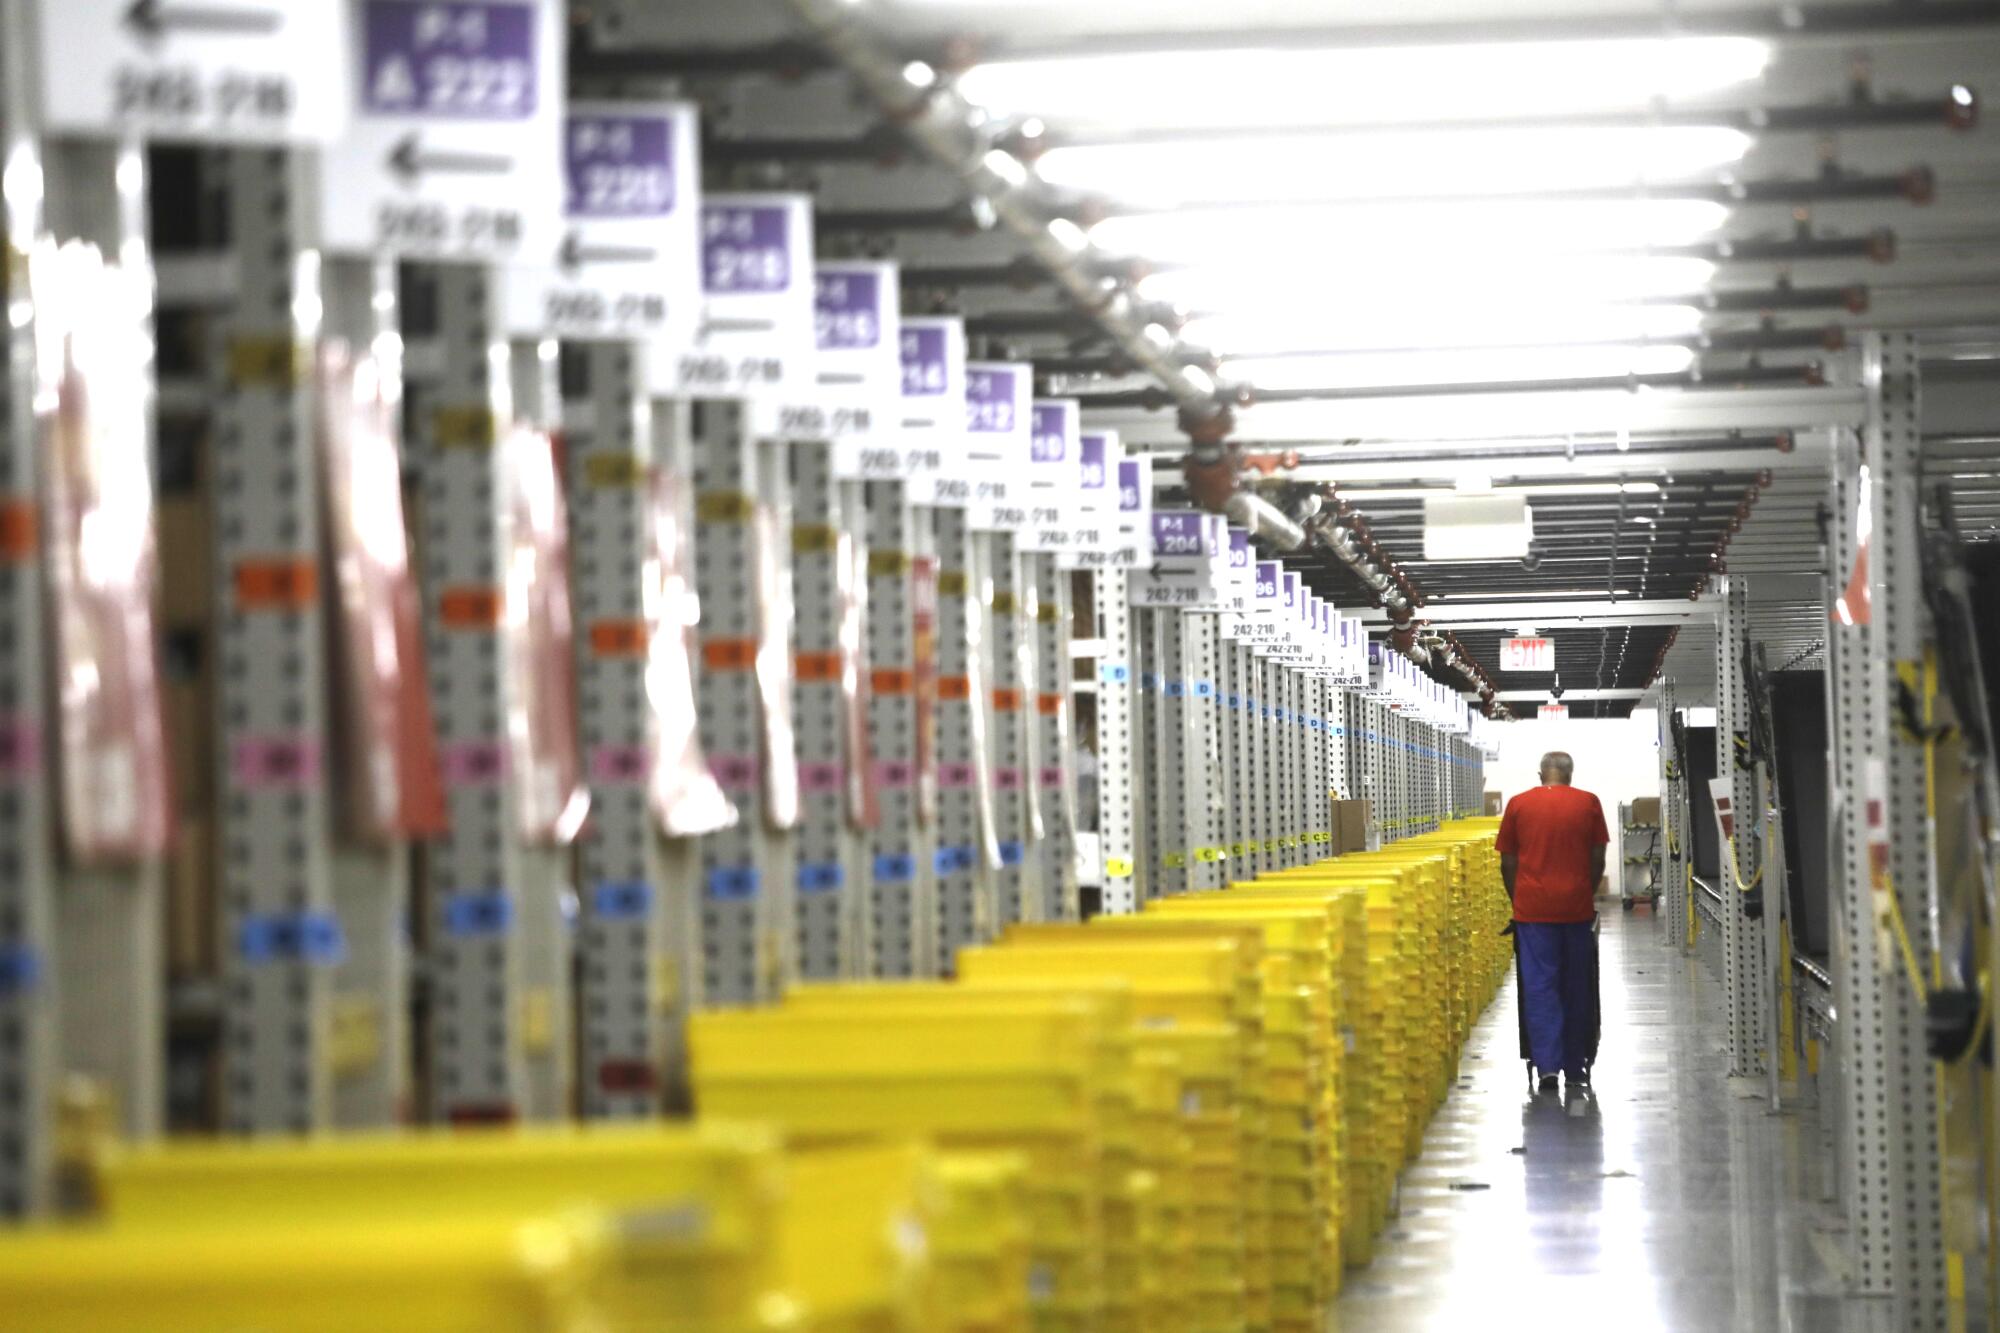 A long line of yellow plastic crates inside a warehouse setting.